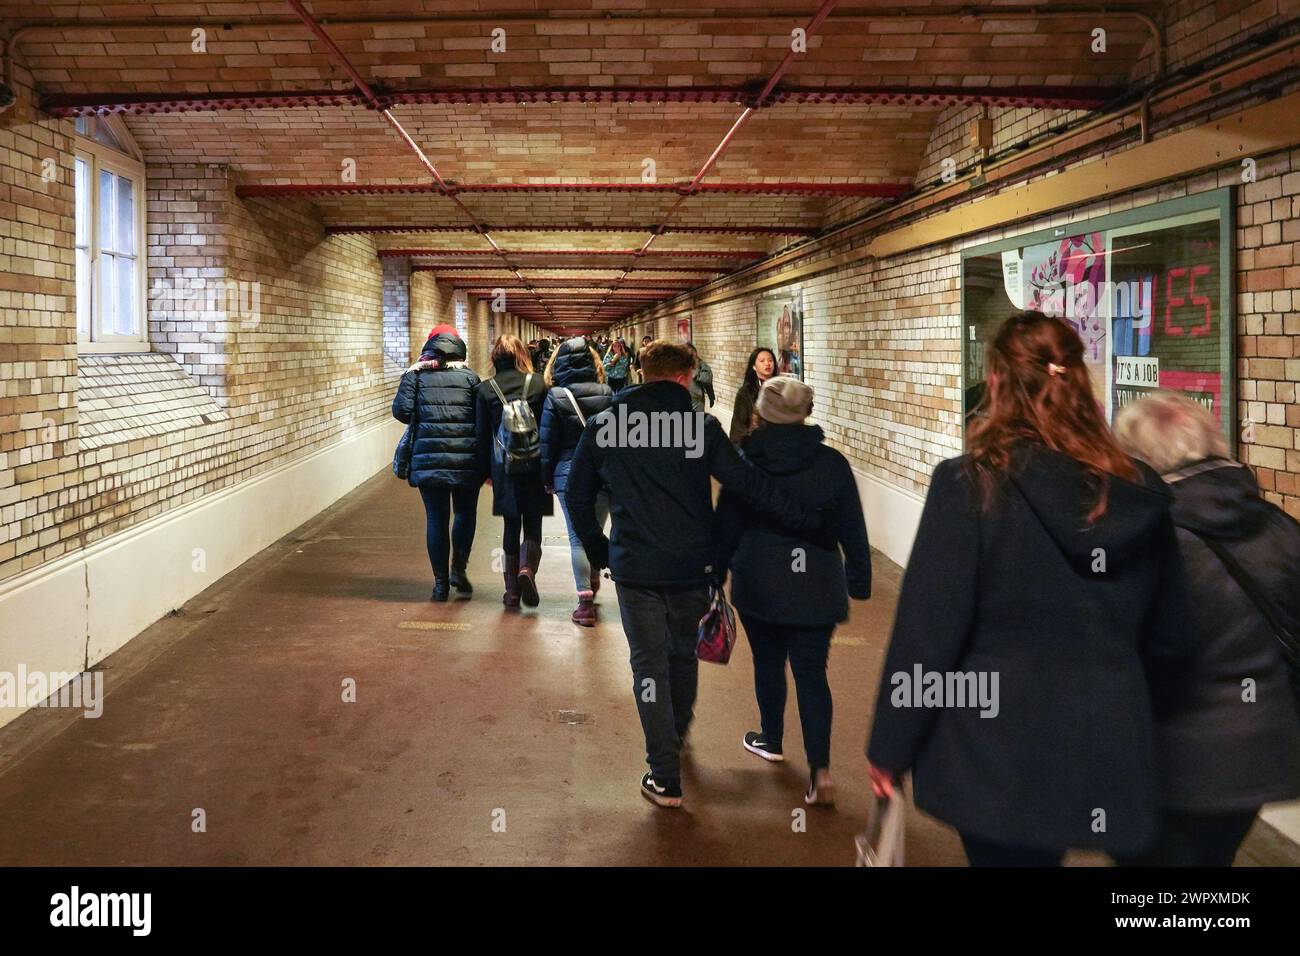 London, United Kingdom - February 01, 2019: Commuters in winter clothes walking through tunnel to Kensington tube station, view from behind Stock Photo